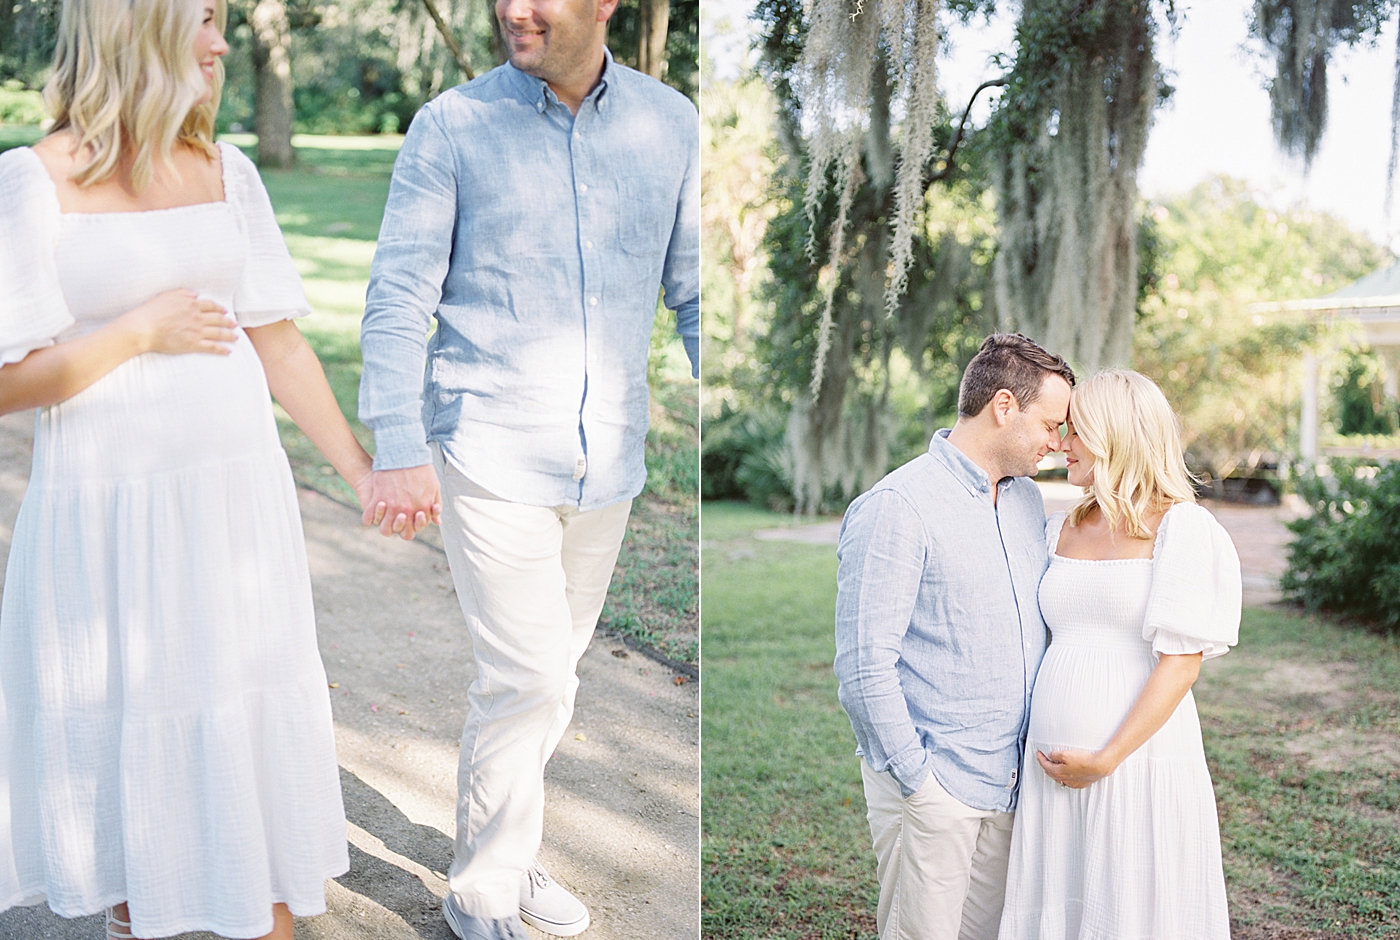 Mom and dad to be walking in the park | Images by Caitlyn Motycka